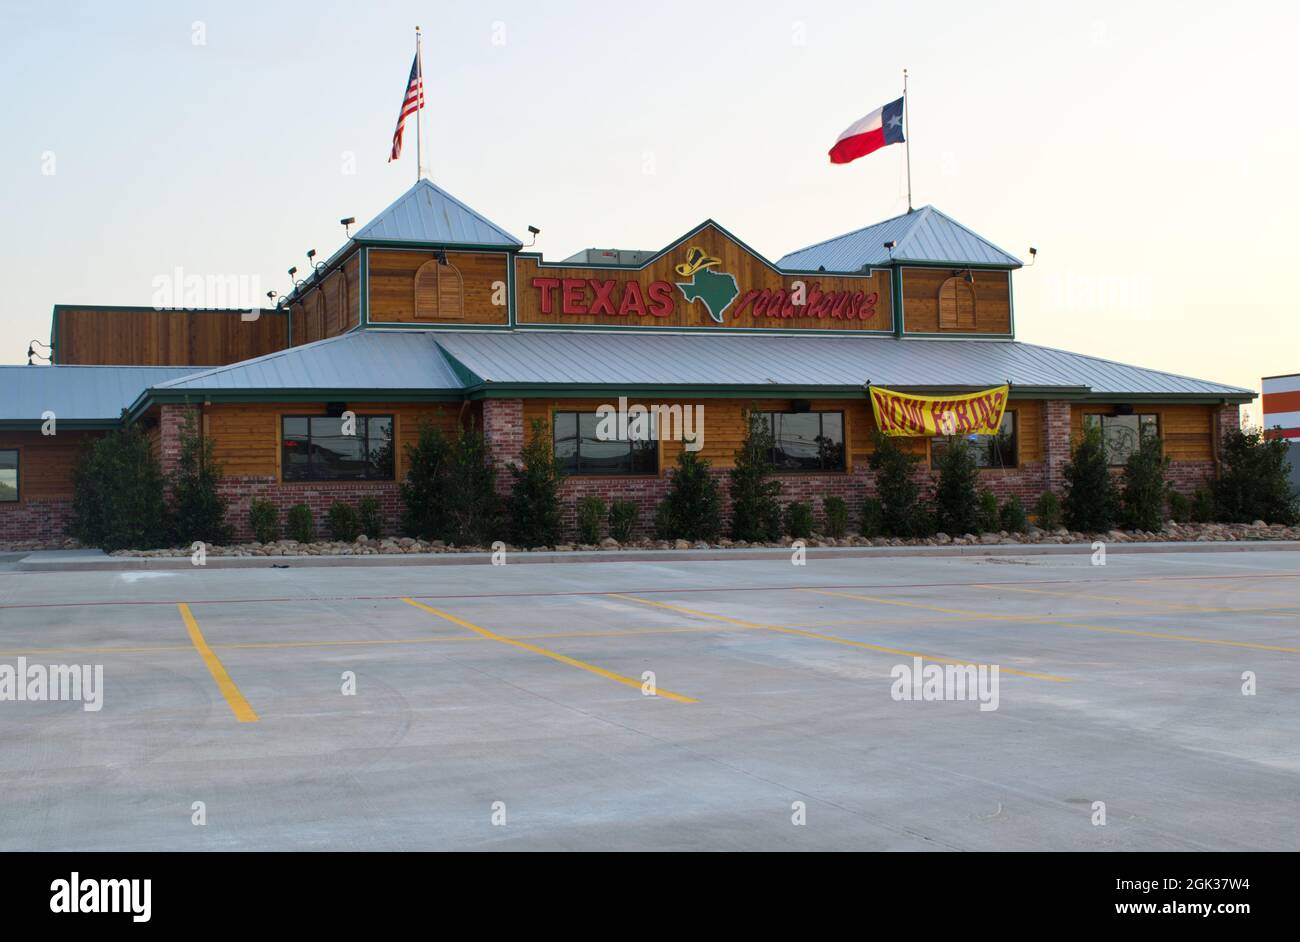 Humble, Texas USA 09-06-2019: Texas Roadhouse steakhouse in Humble, TX with a hiring sign out front. Parking lot in the foreground with flag on roof. Stock Photo